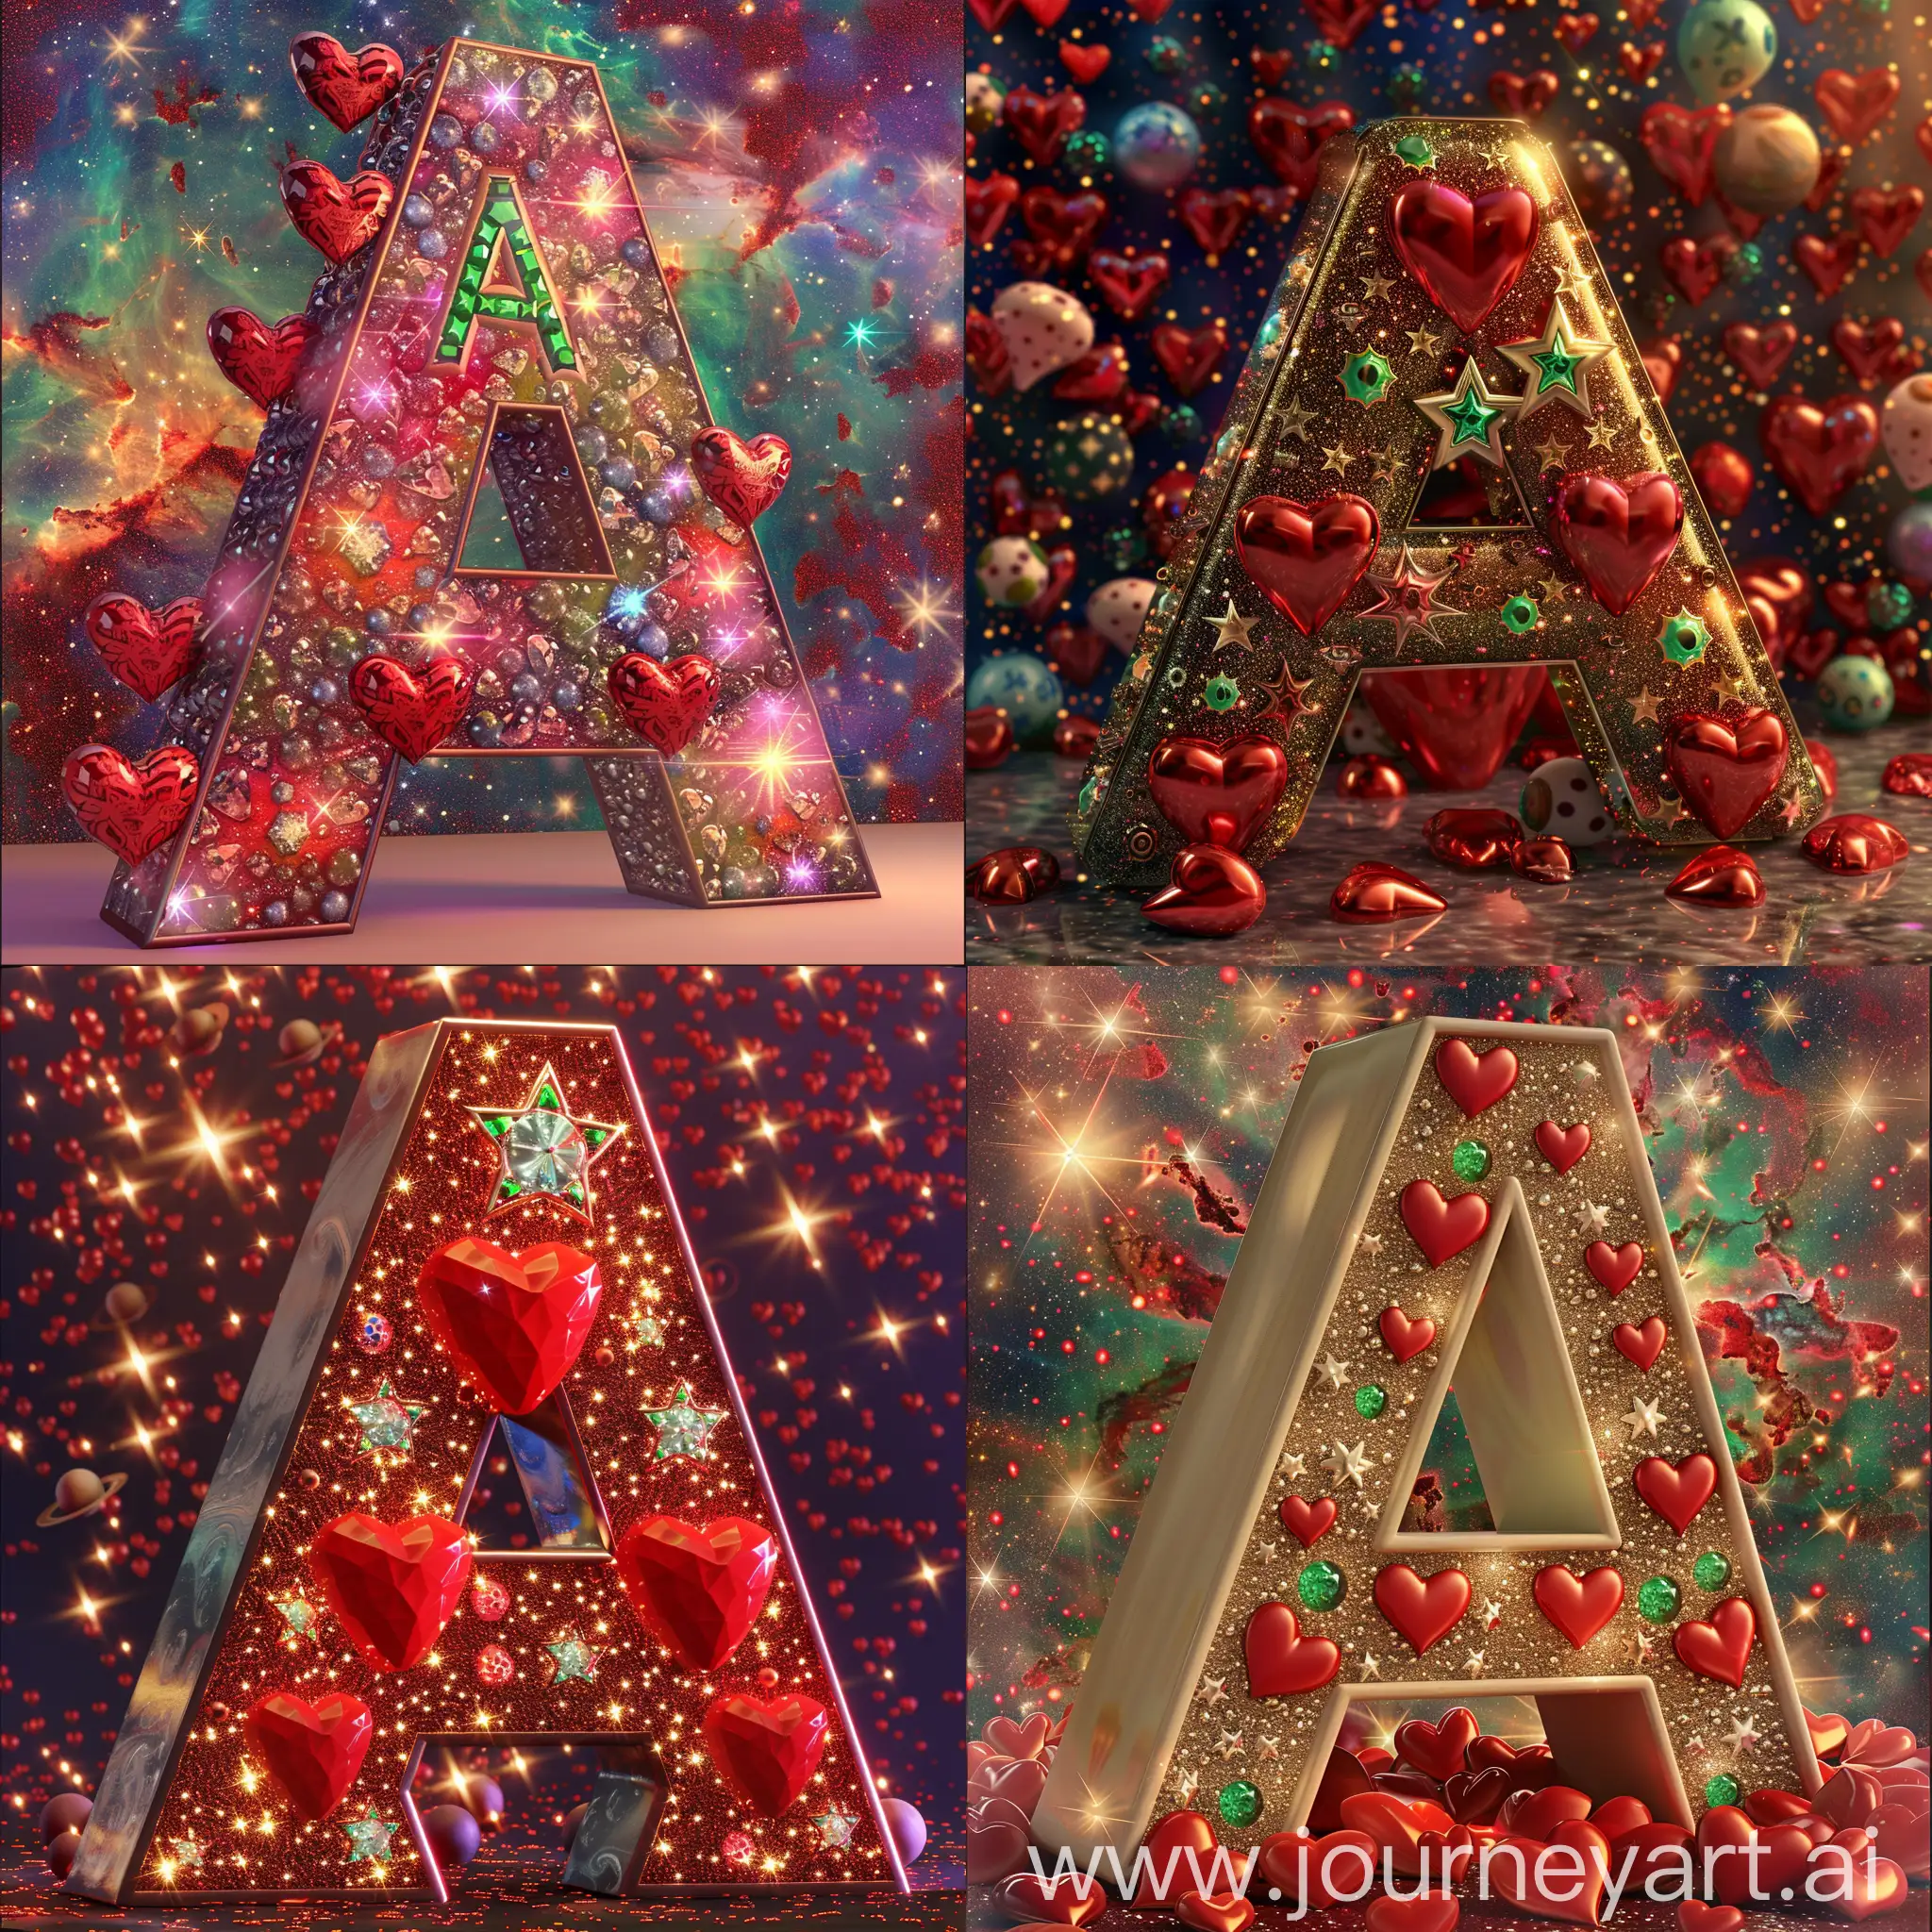 the letter "A" 3D, inside it stars and constellations and galaxies, high quality, best quality, surrounded by red hearts studded with emeralds and diamonds like the shine of a star, textured background in an explosion of colors in a large speech, expressions of smooth image, very detailed, vibrant colors, intricate, ultra realistic, 8k, cinematic, extremely beautiful.